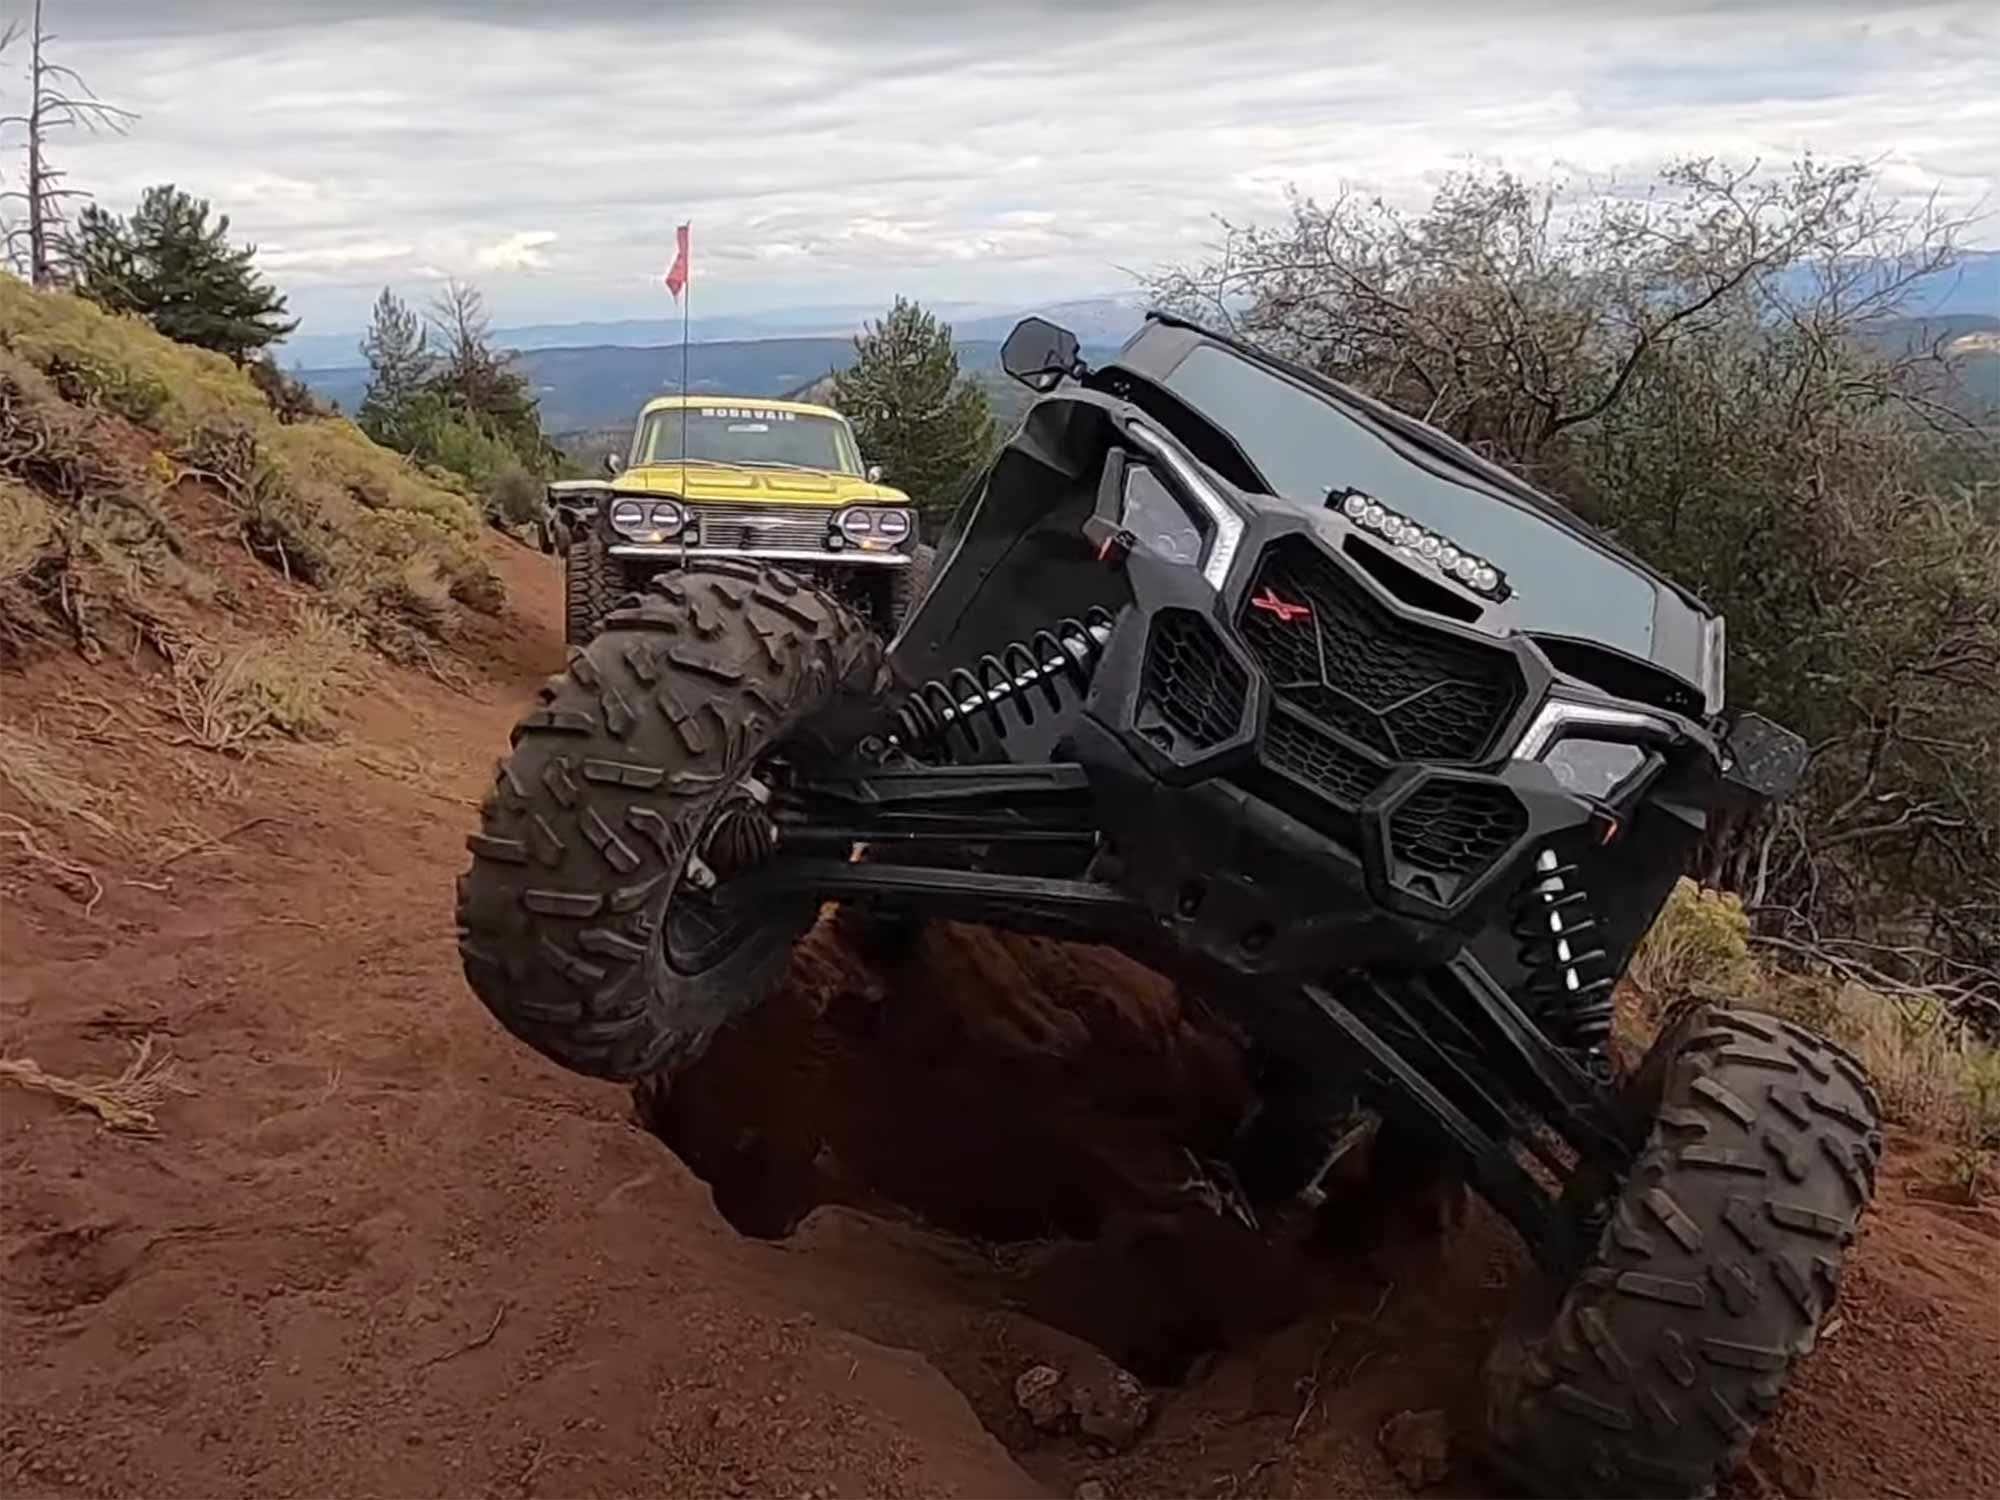 Matt’s Off Road Recovery, famed for its insane off-road Corvair recovery vehicle, is under the gun from investigators in Utah.